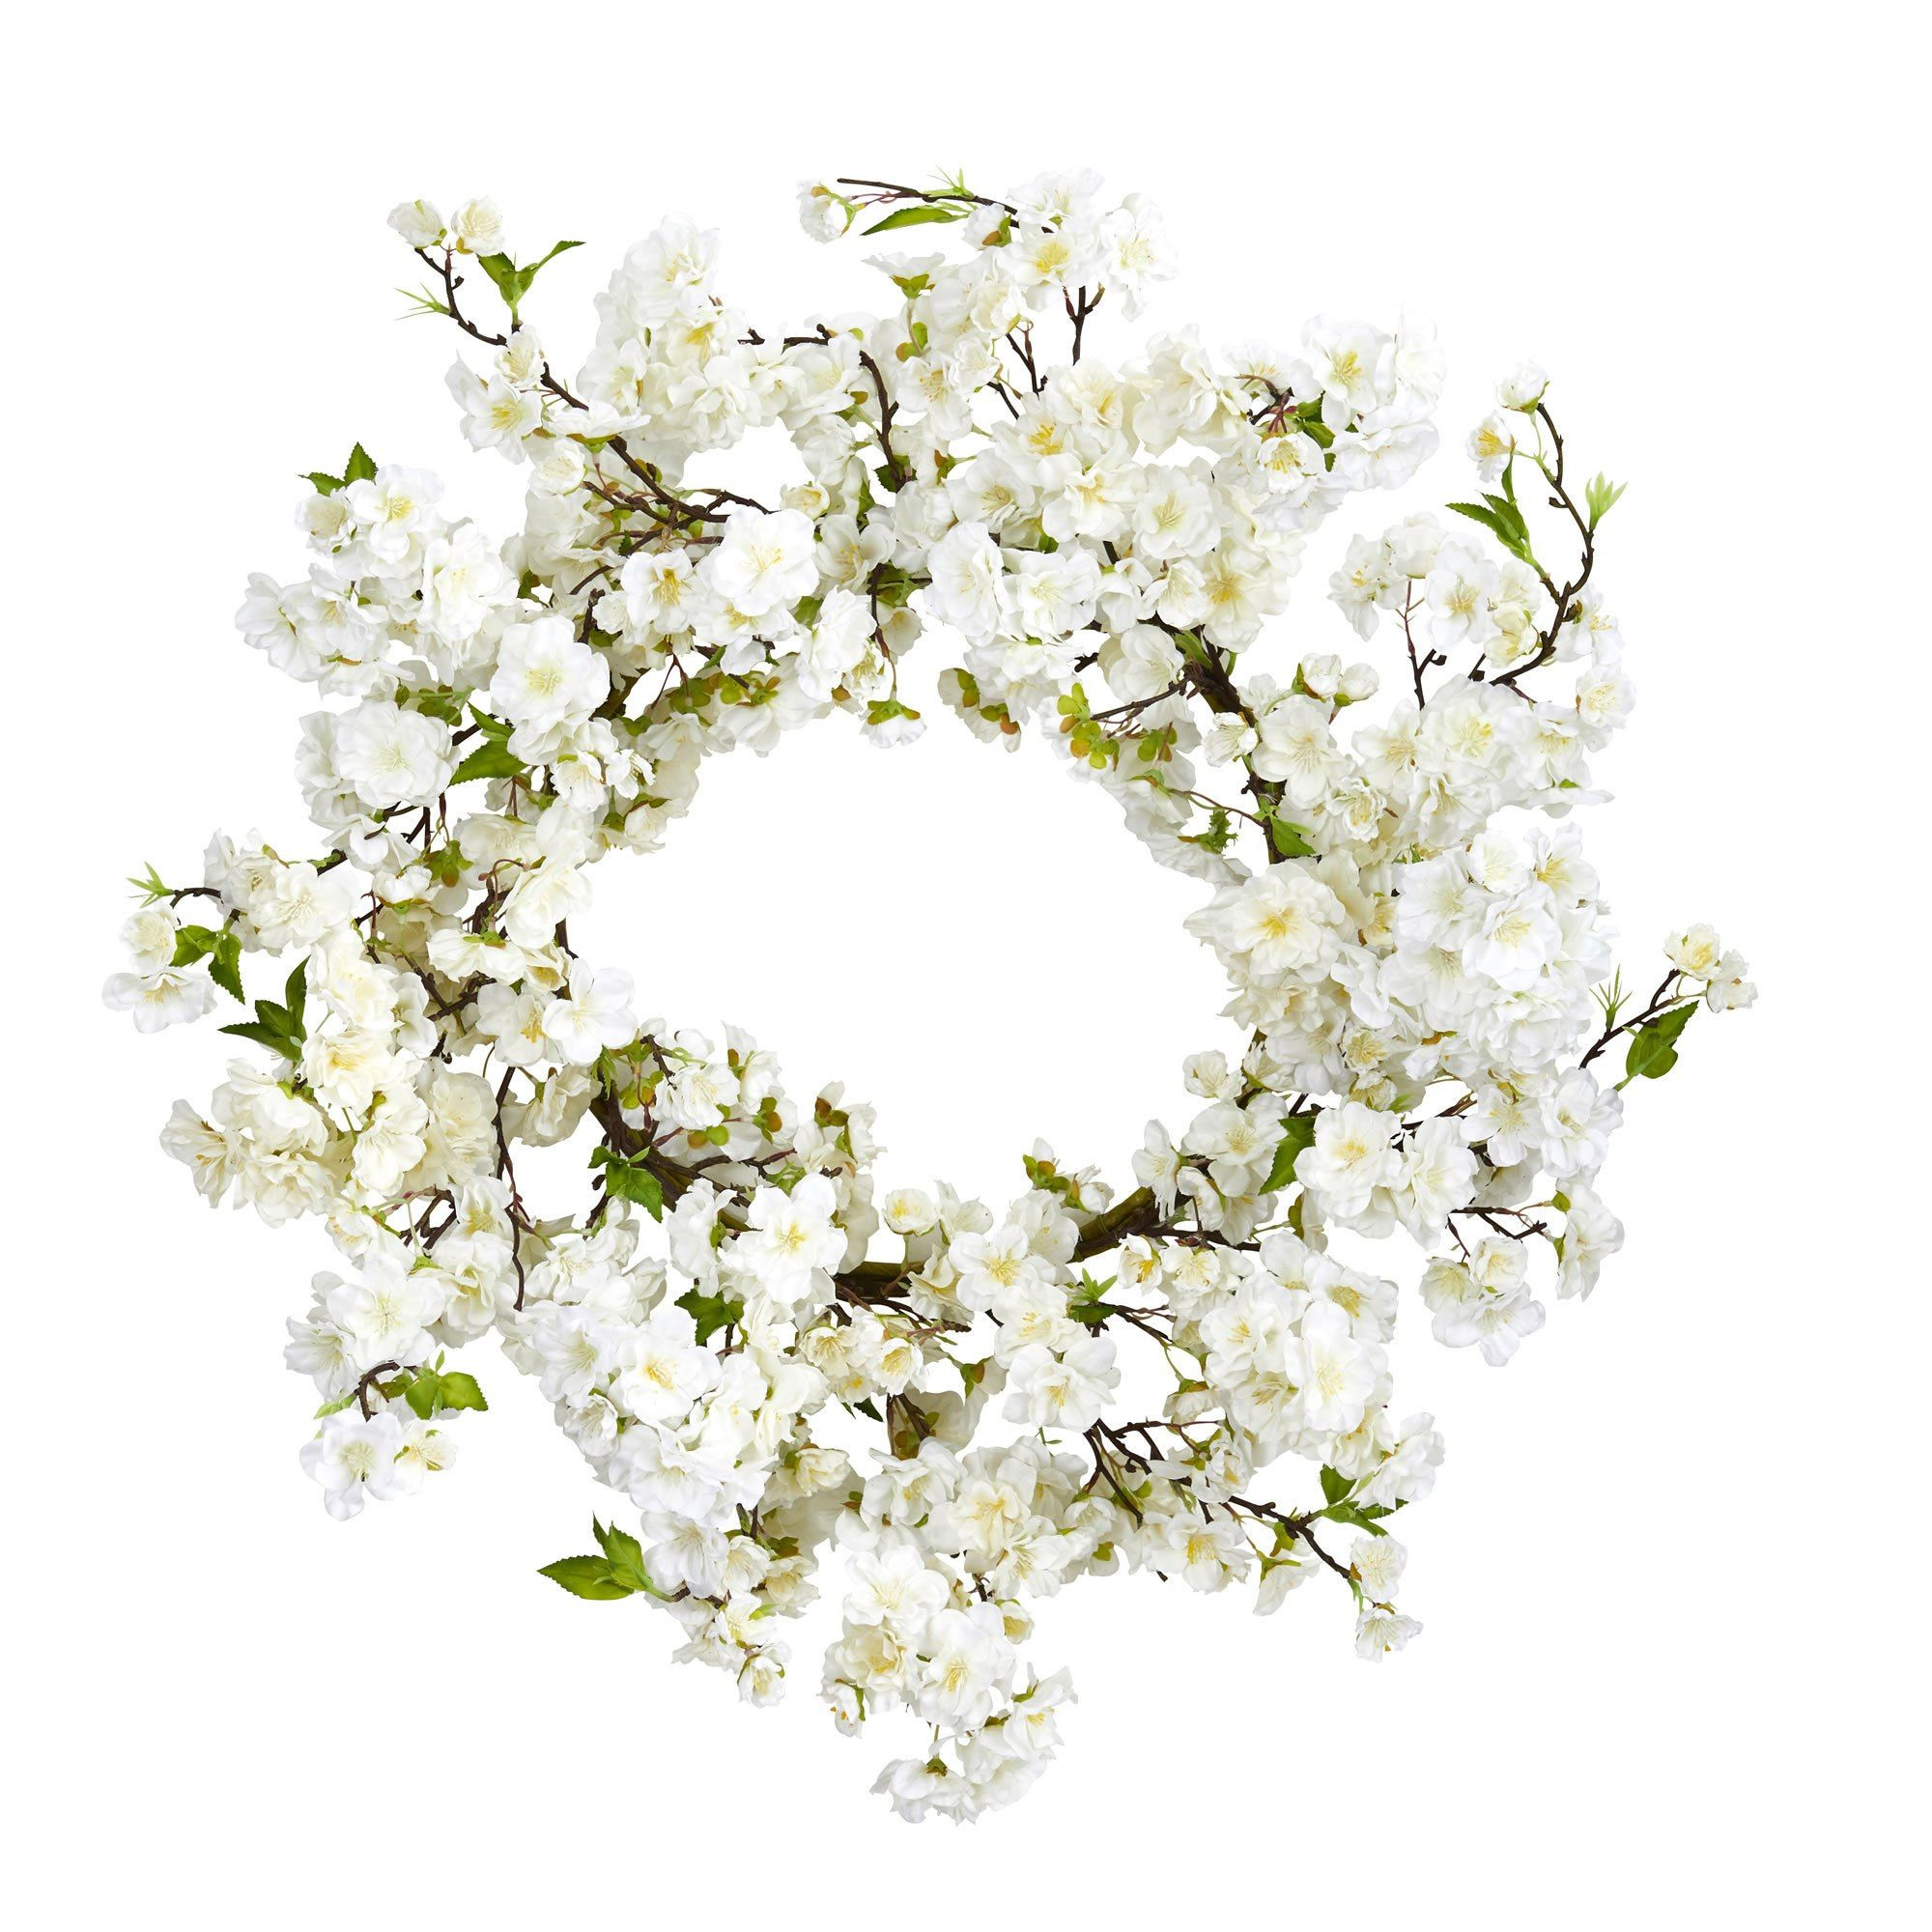 20 Lovely Cherry Blossom In Vase 2024 free download cherry blossom in vase of 24 cherry blossom wreath cherry blossoms and shrub in 24 cherry blossom wreath